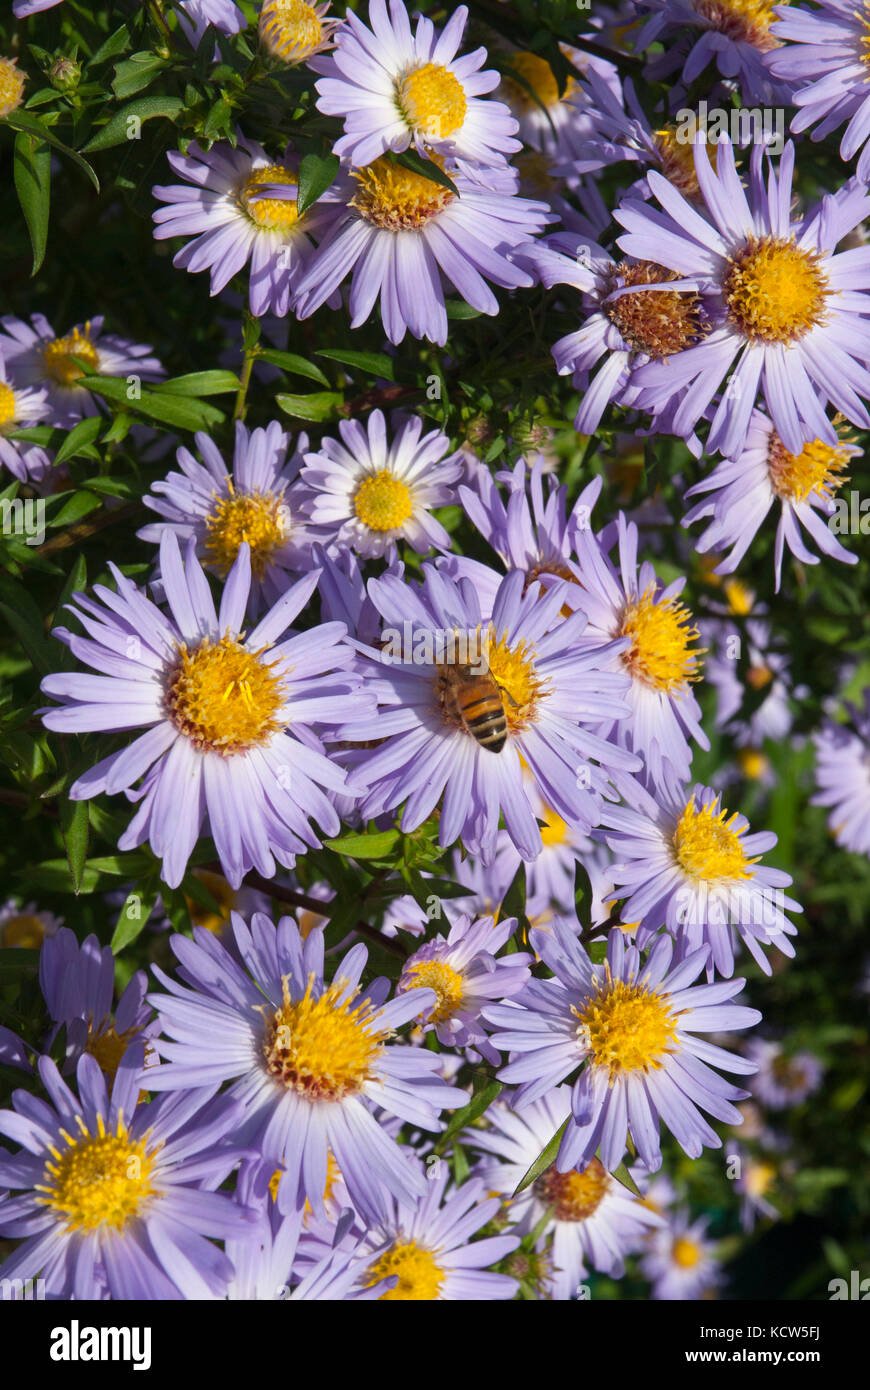 Clusters of colourful purple/ mauve asters (Michaelmas daisies) growing in sunshine, visited by honey bees. Stock Photo